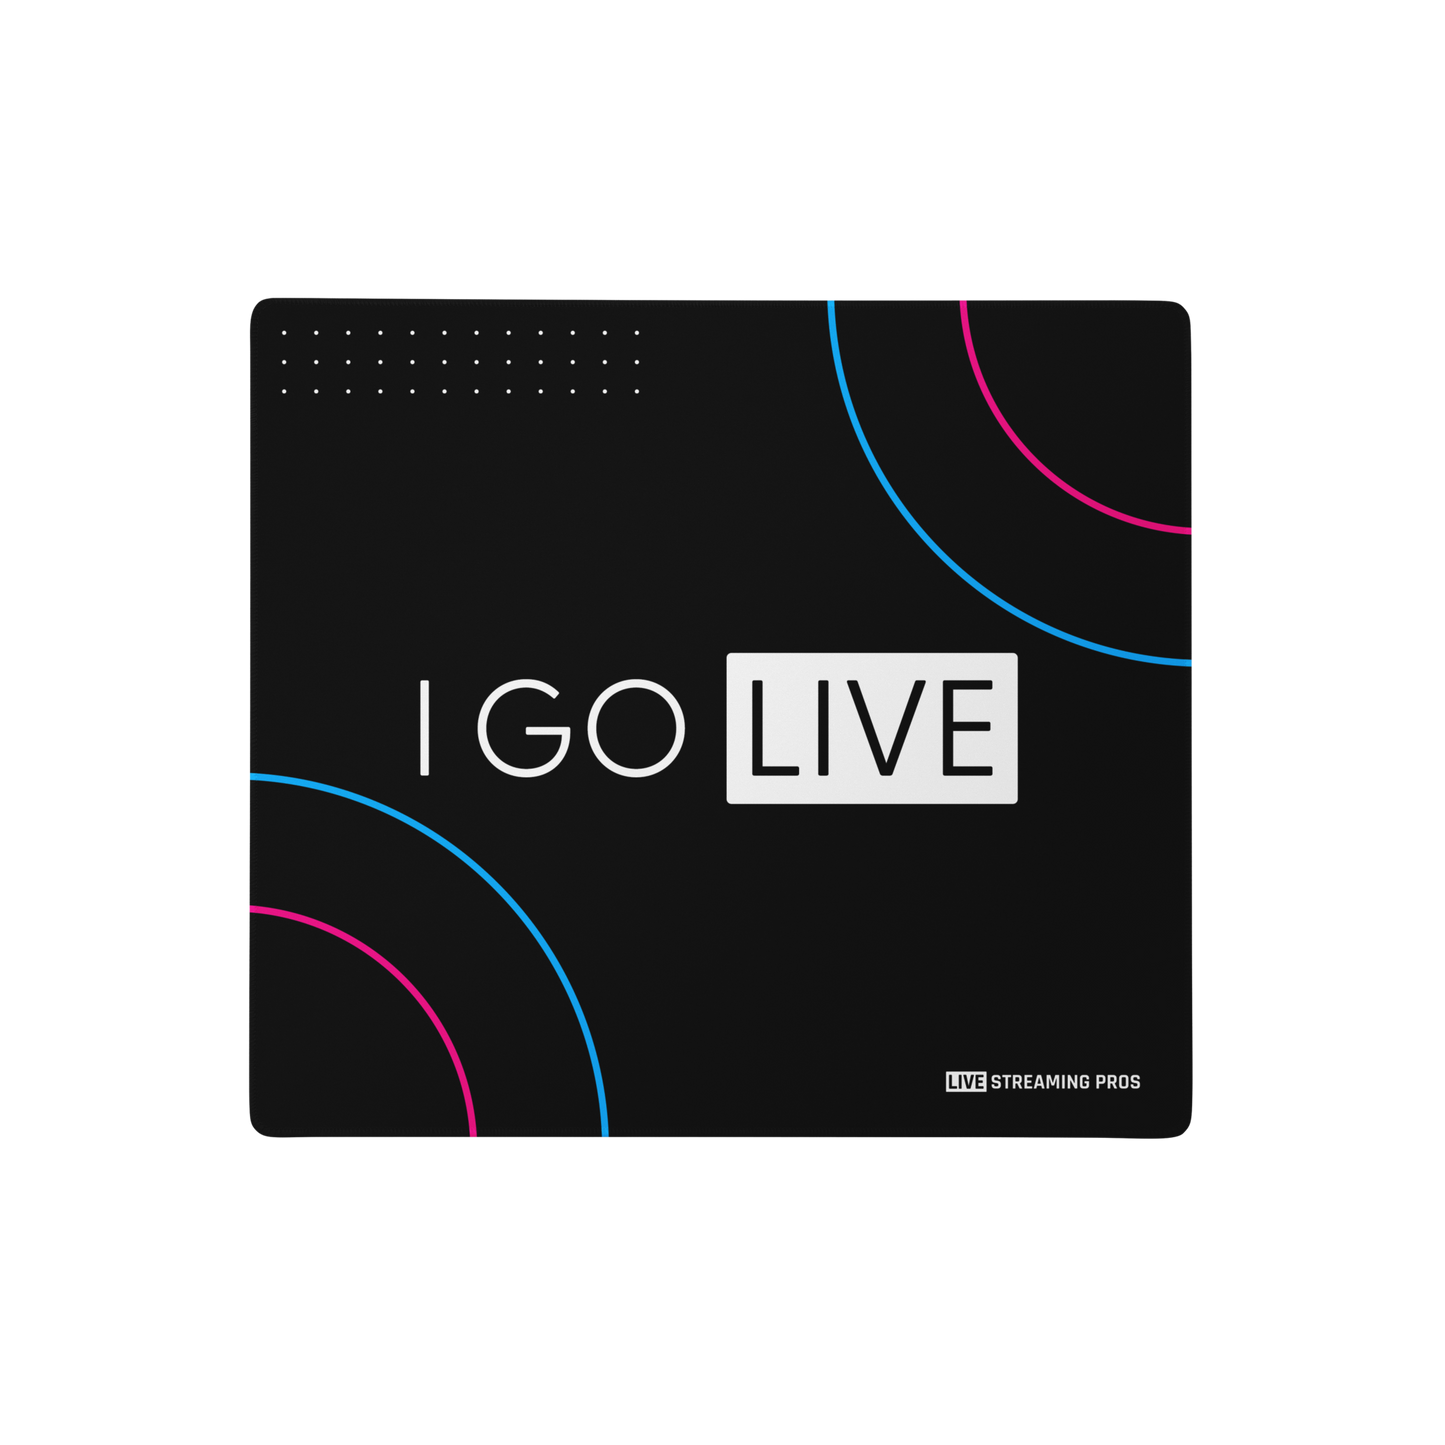 "I GO LIVE" Large Gaming/Streaming Mouse Pad